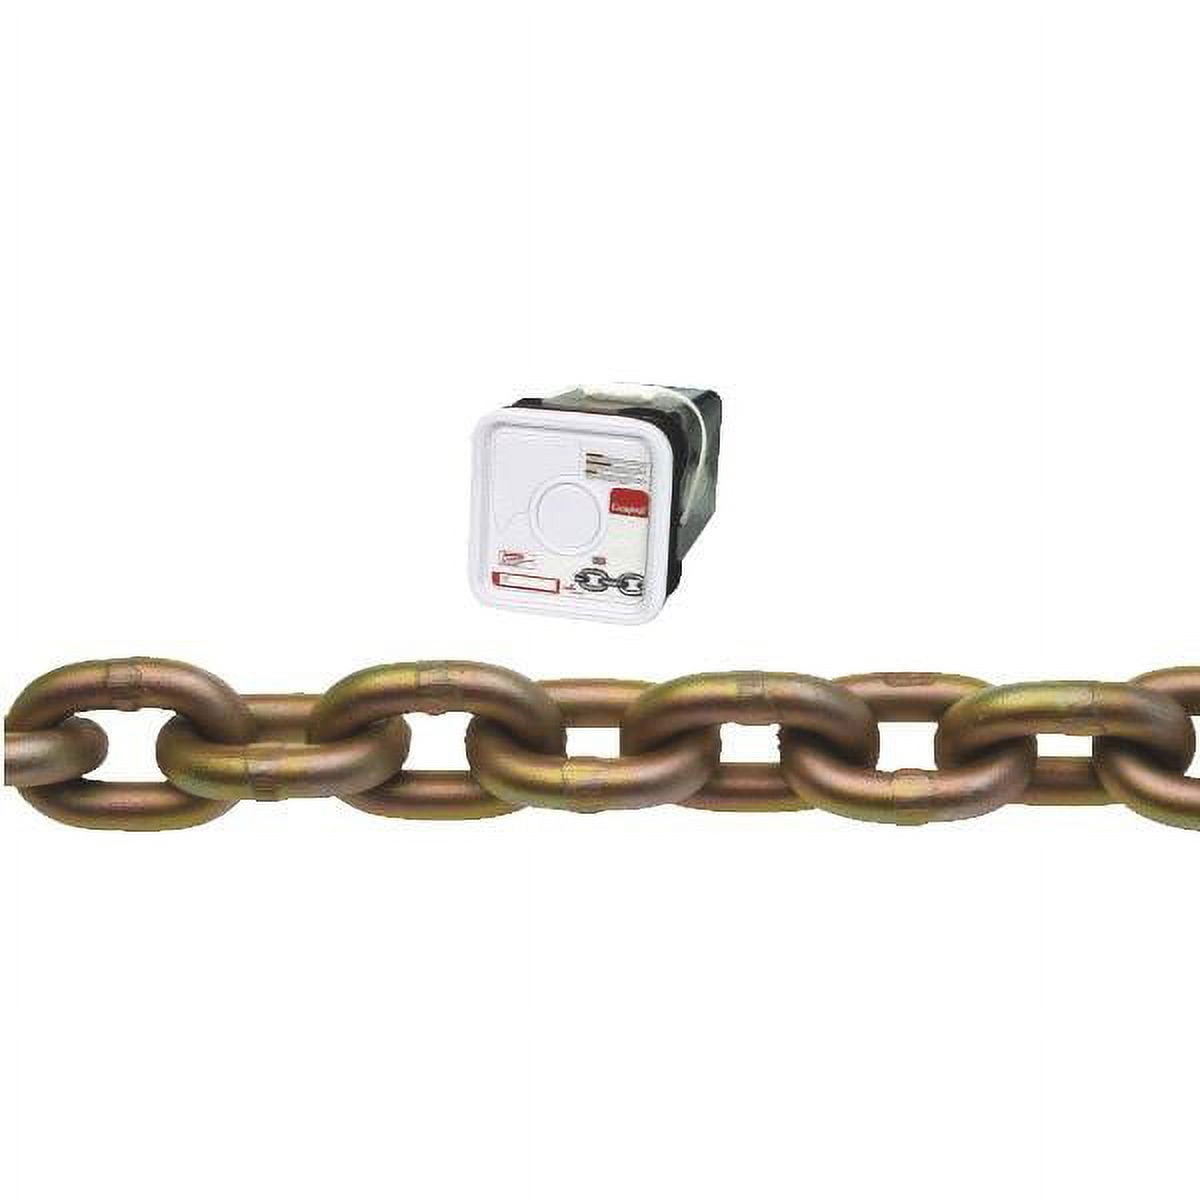 510626 45 Ft. Chain Transpoart 3 By 8, Chrome